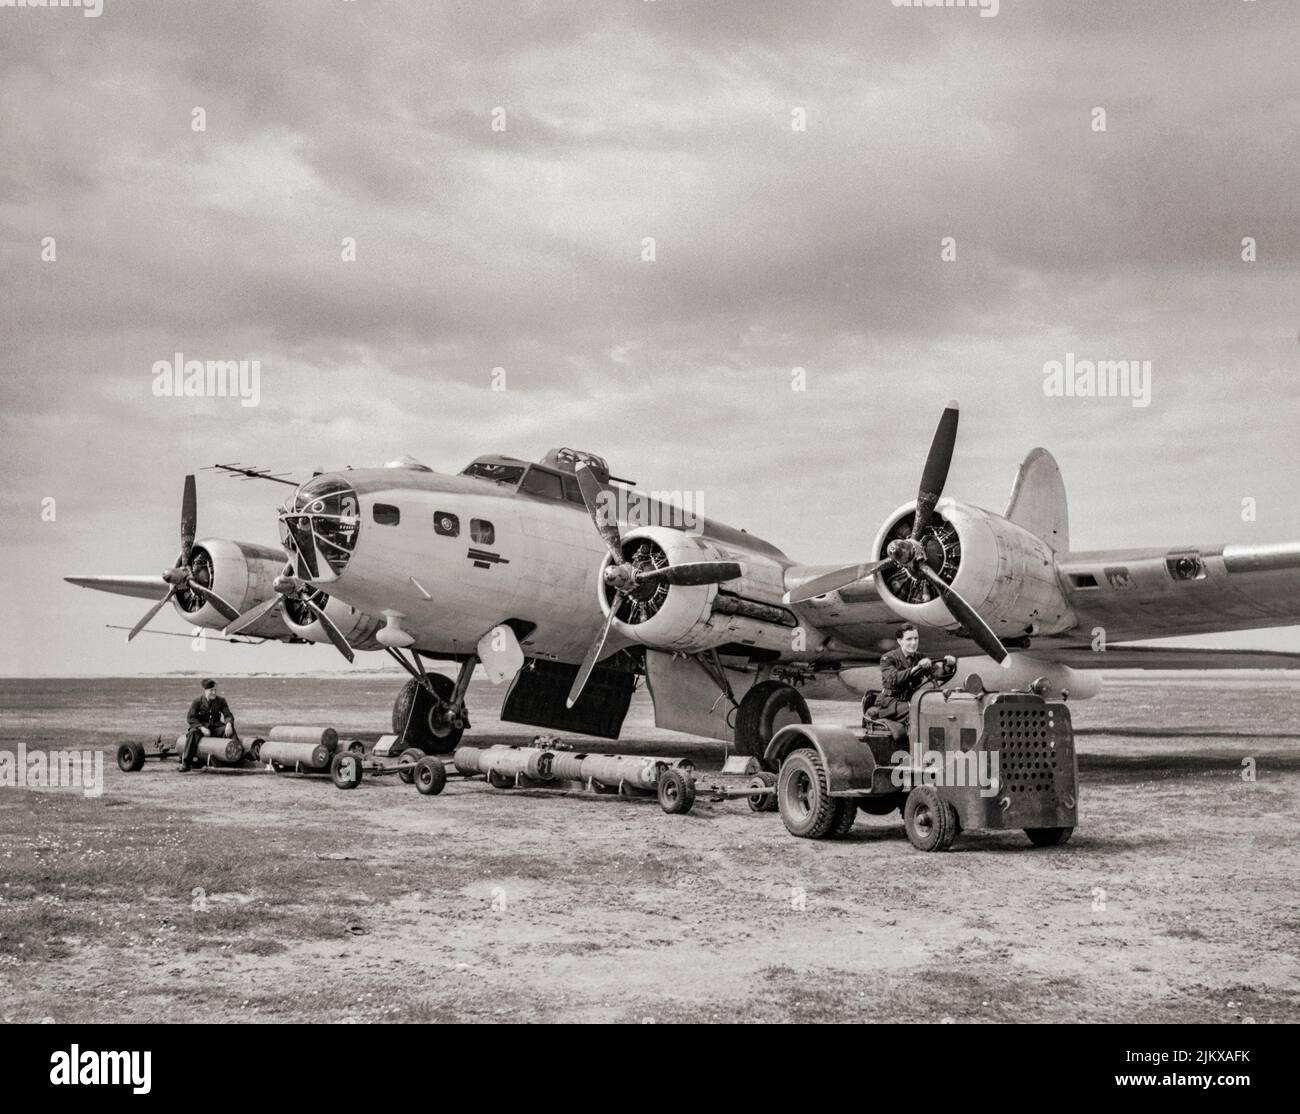 A  Boeing B-17 Flying Fortress II OF No 220 Squadron seen 'bombing up' with depth charges at Benbecula, in the Outer Hebrides, Scotland, May 1943. The  Fortress was a four-engined heavy bomber was a relatively fast, high-flying, long-range bomber with heavy defensive armament at the expense of bombload. It developed a reputation for toughness based upon stories and photos of badly damaged B-17s safely returning to base. In addition to its role as a bomber, the B-17 was also employed as a transport, antisubmarine aircraft, drone controller, and search-and-rescue aircraft. Stock Photo